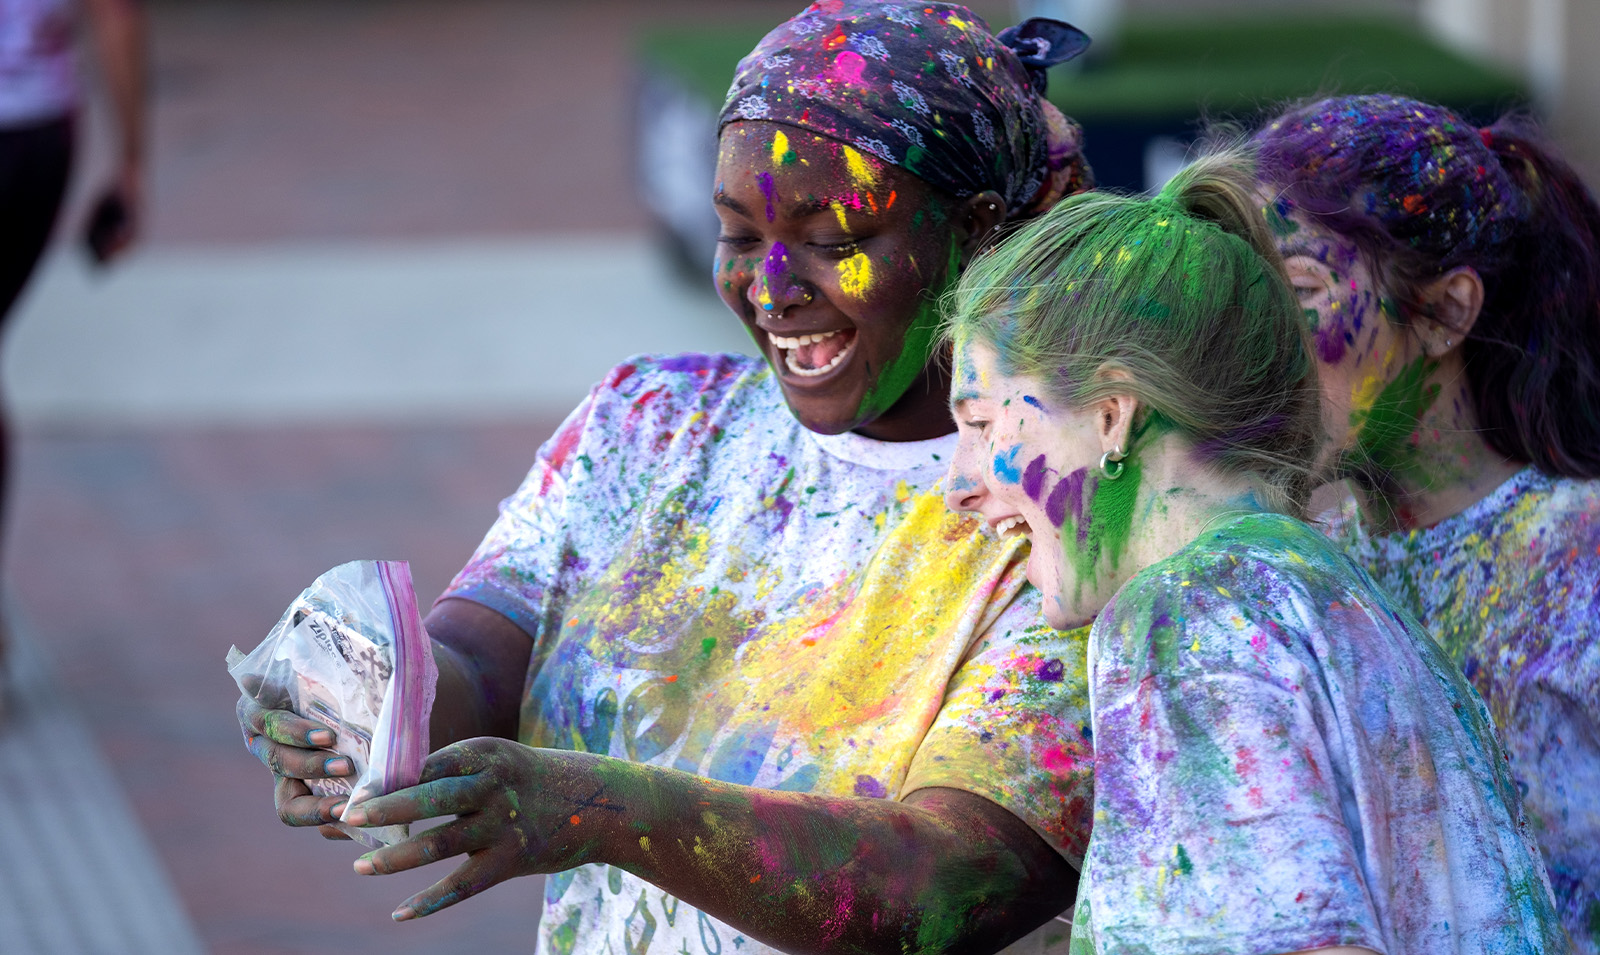 Two students covered in paint celebrating Holi.